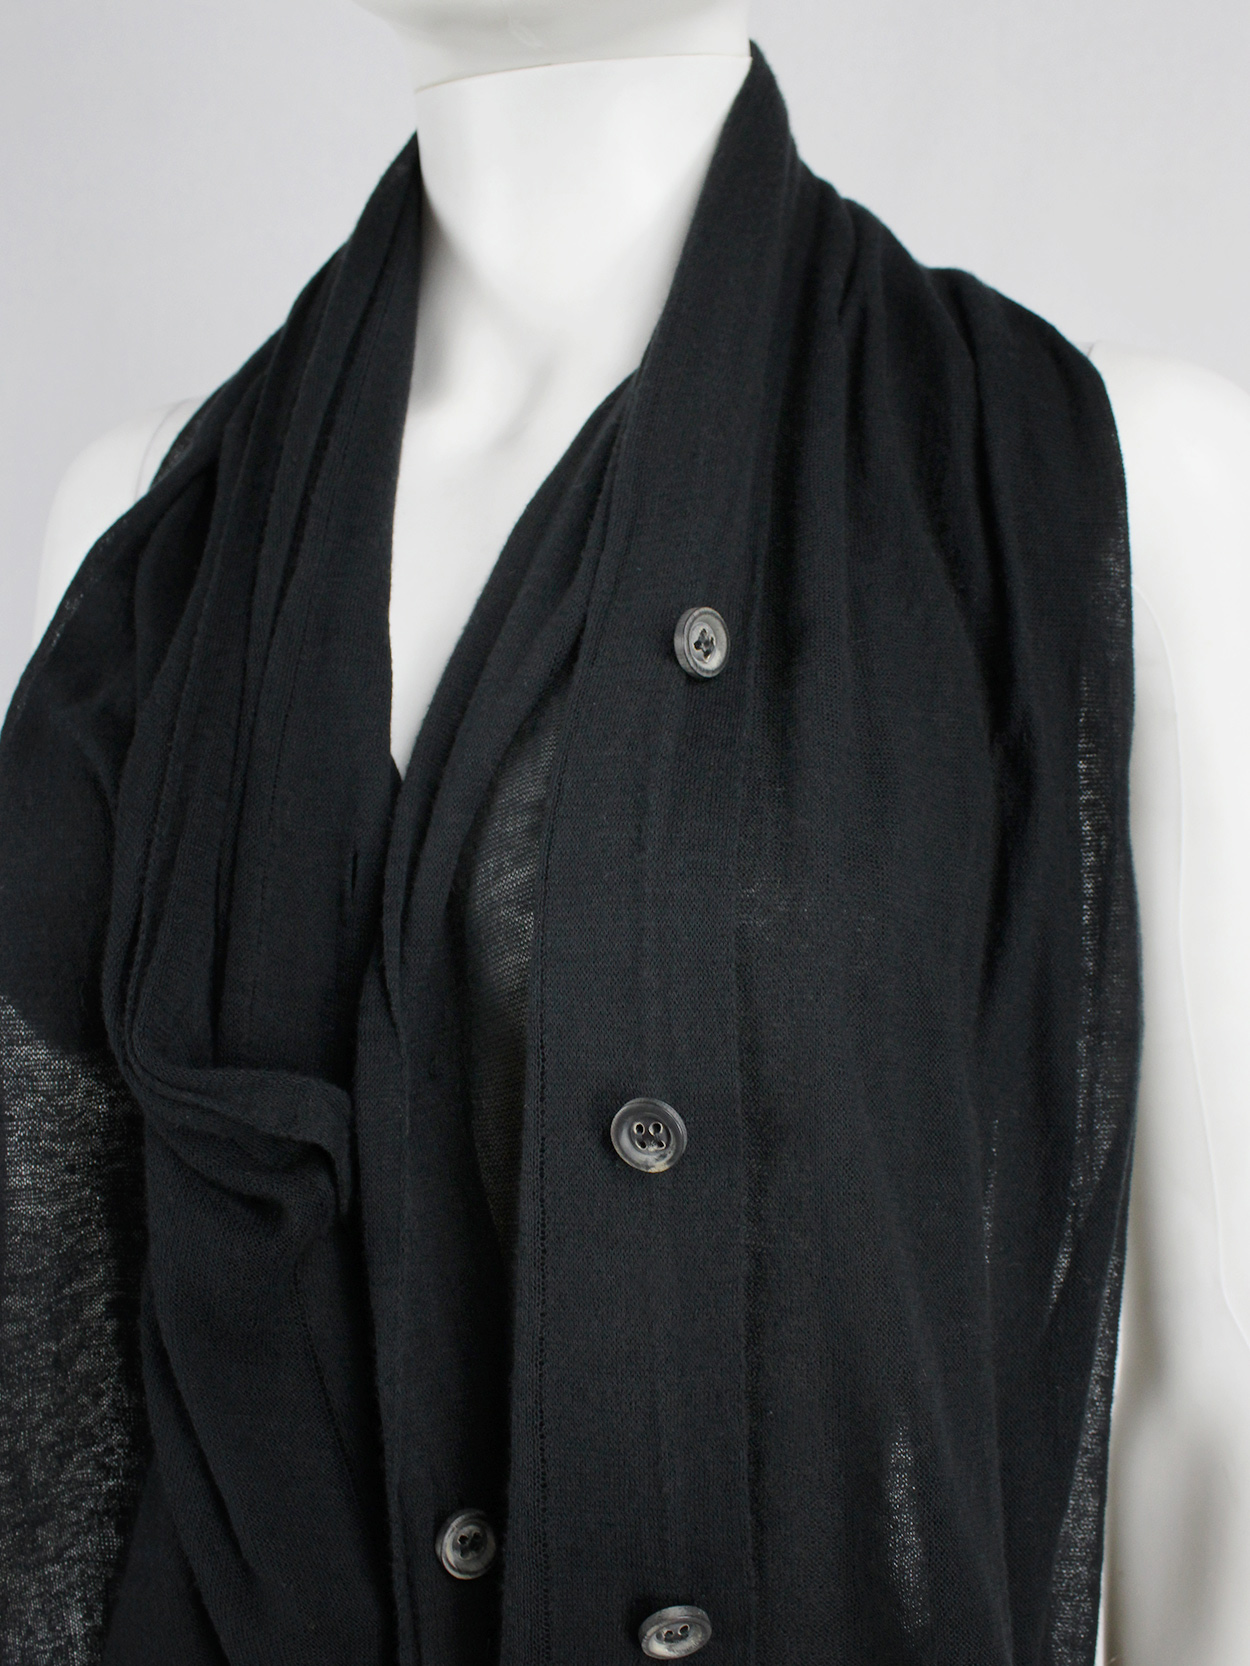 Ann Demeulemeester black convertible scarf with buttons - V A N II T A S